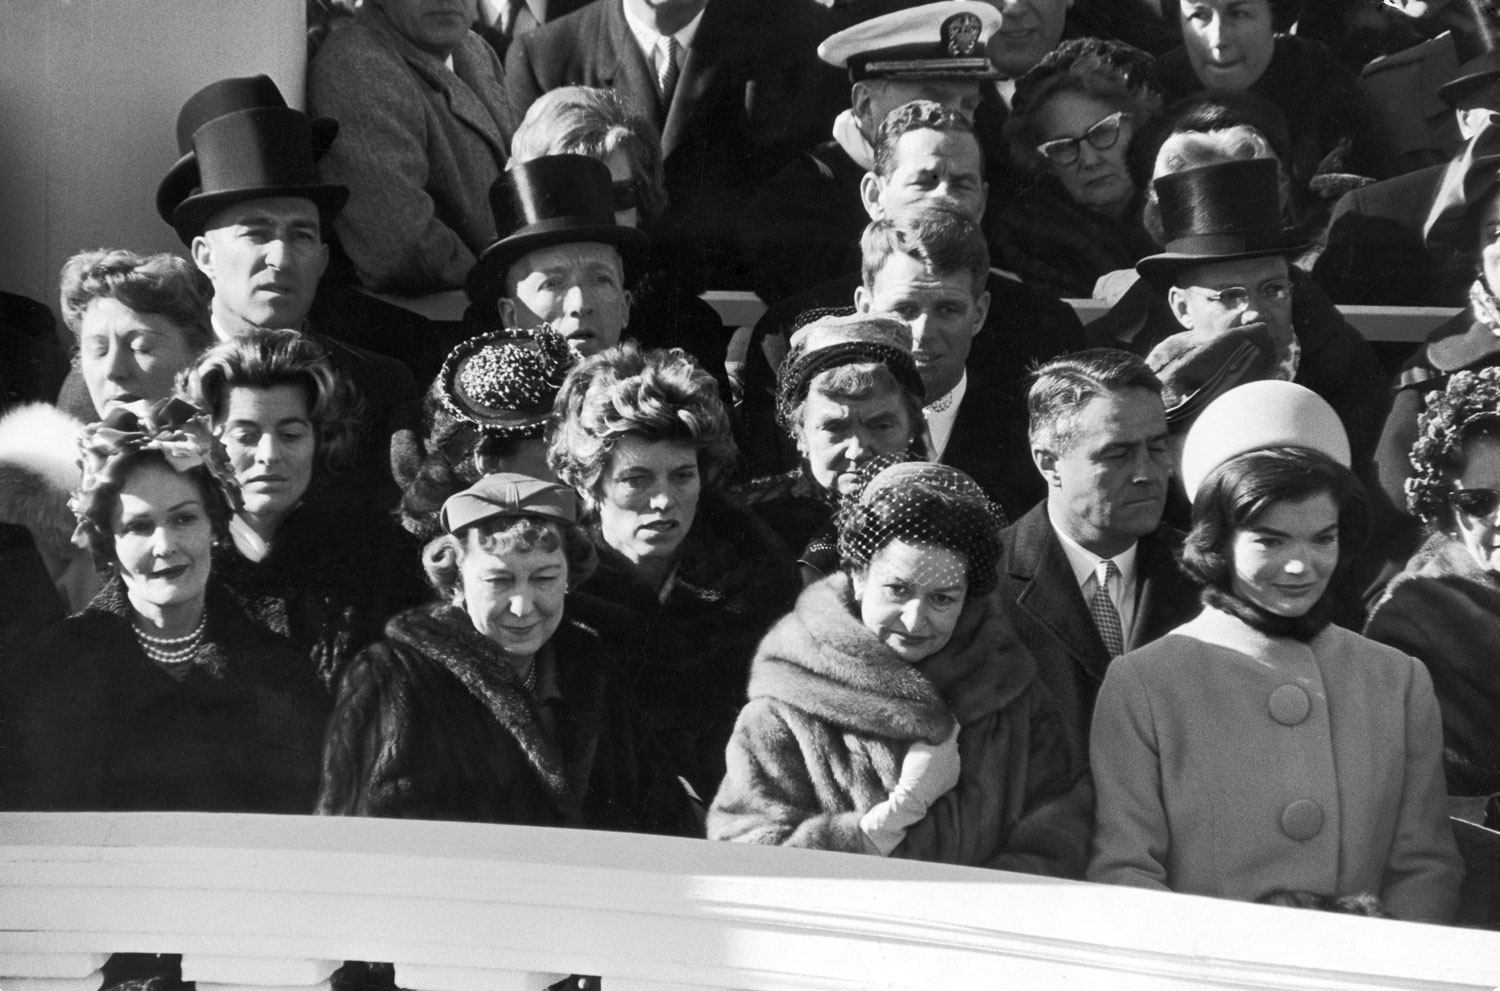 Four past, present and future First Ladies at John F. Kennedy's inauguration ceremony in January 1961: left to right: Pat Nixon, Mamie Eisenhower, Lady Bird Johnson and Jacqueline Kennedy.